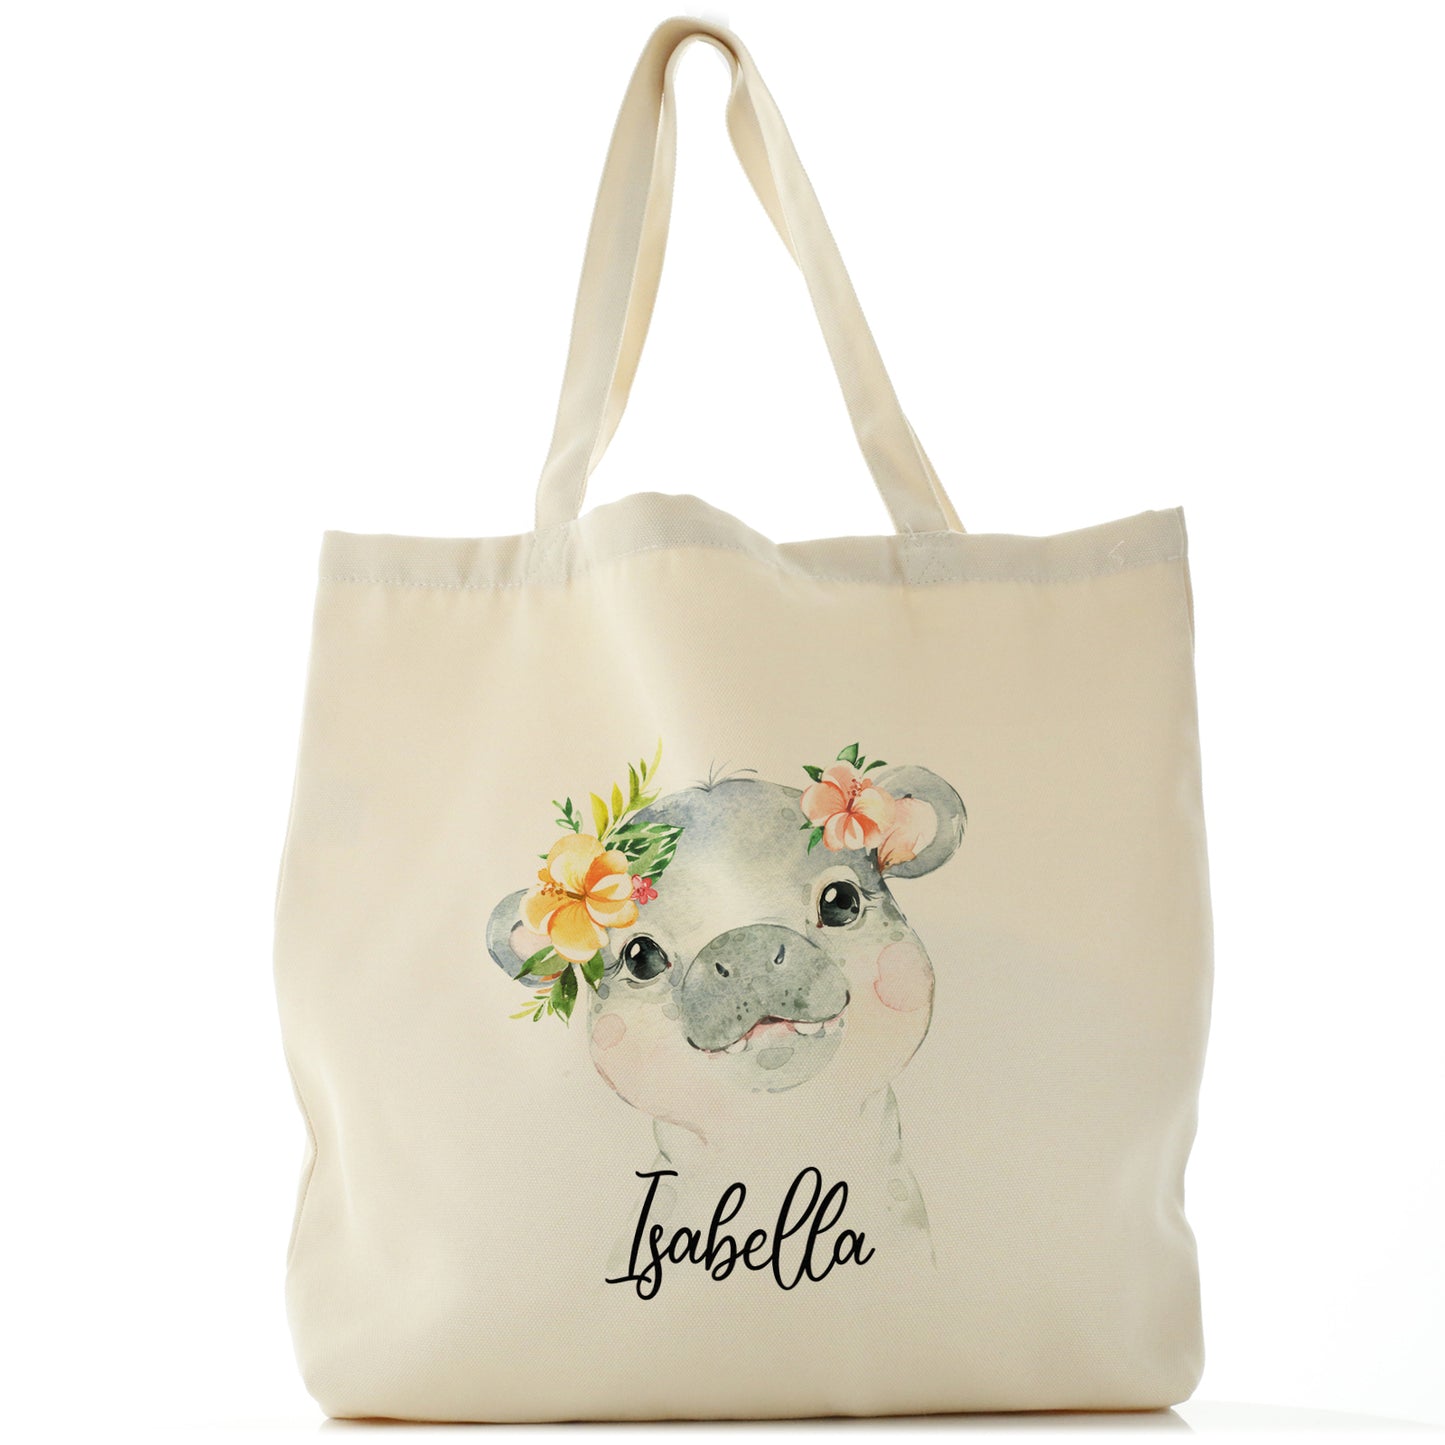 Personalised Canvas Tote Bag with Hippo Peach Flowers and Cute Text